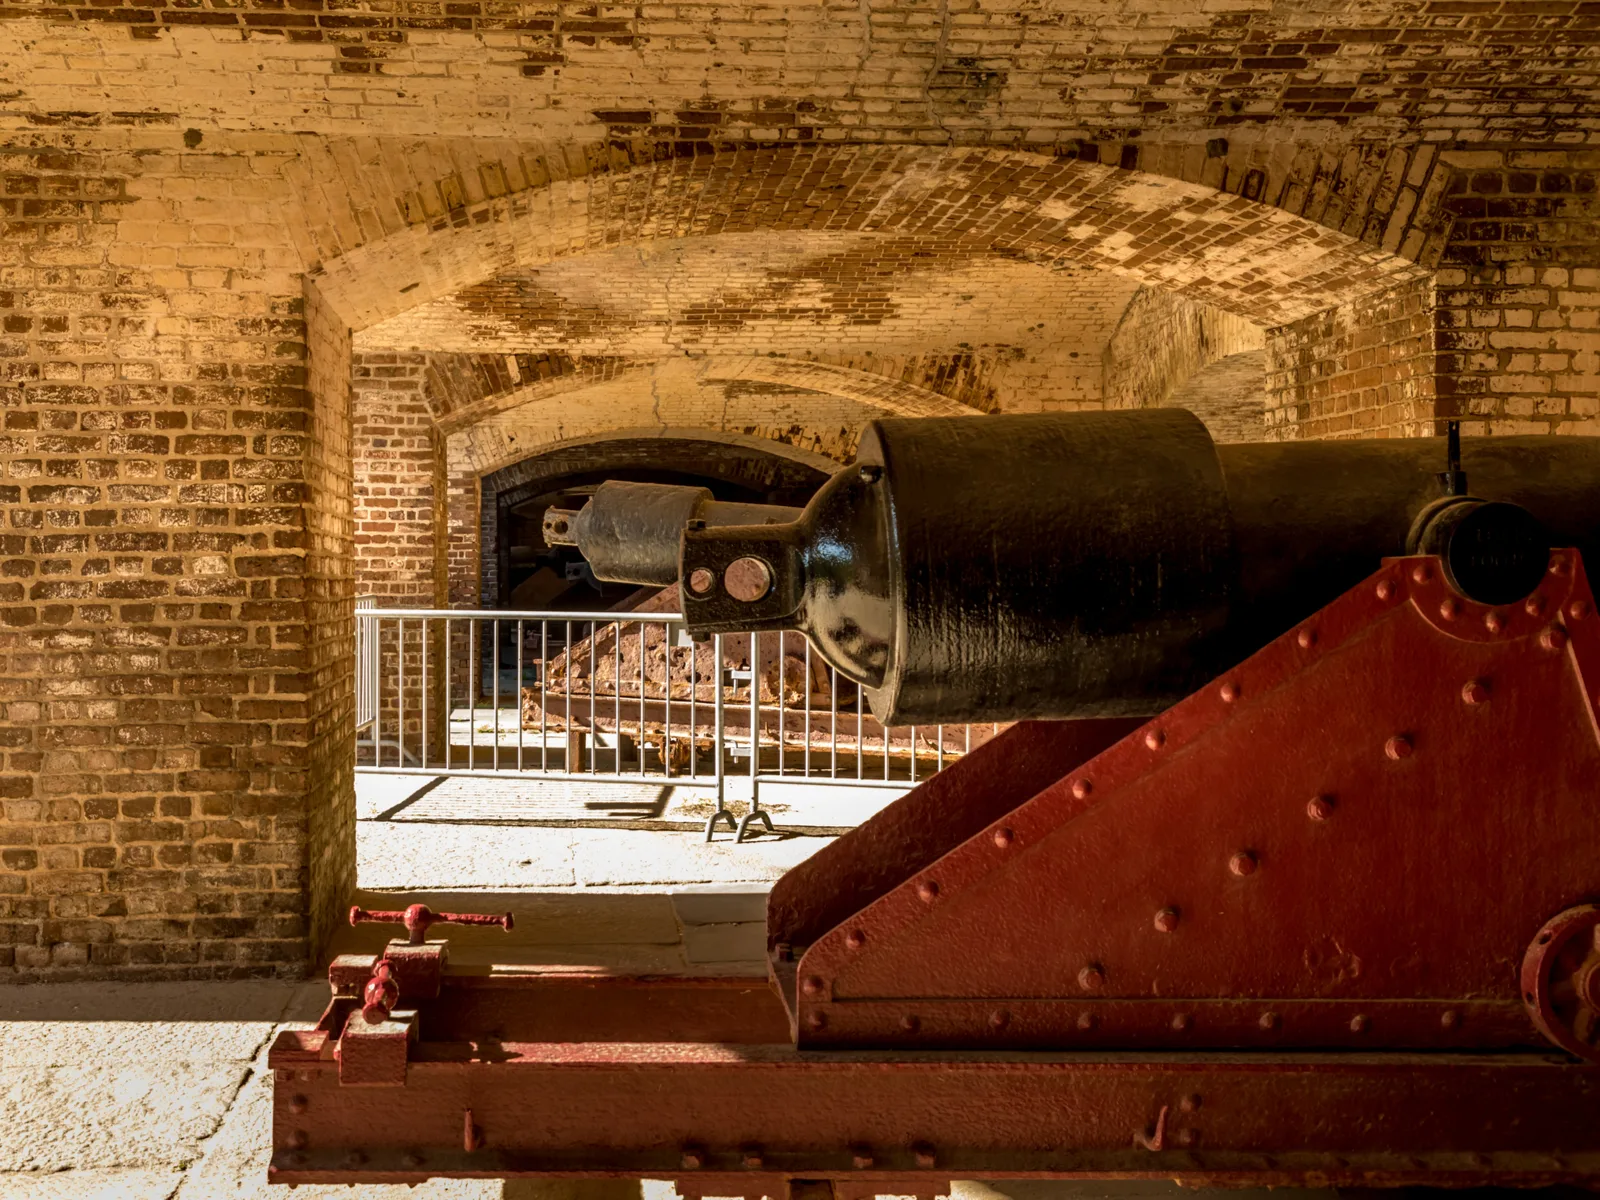 Canon at Fort Sumter, one of the best sights to see in Charleston South Carolina